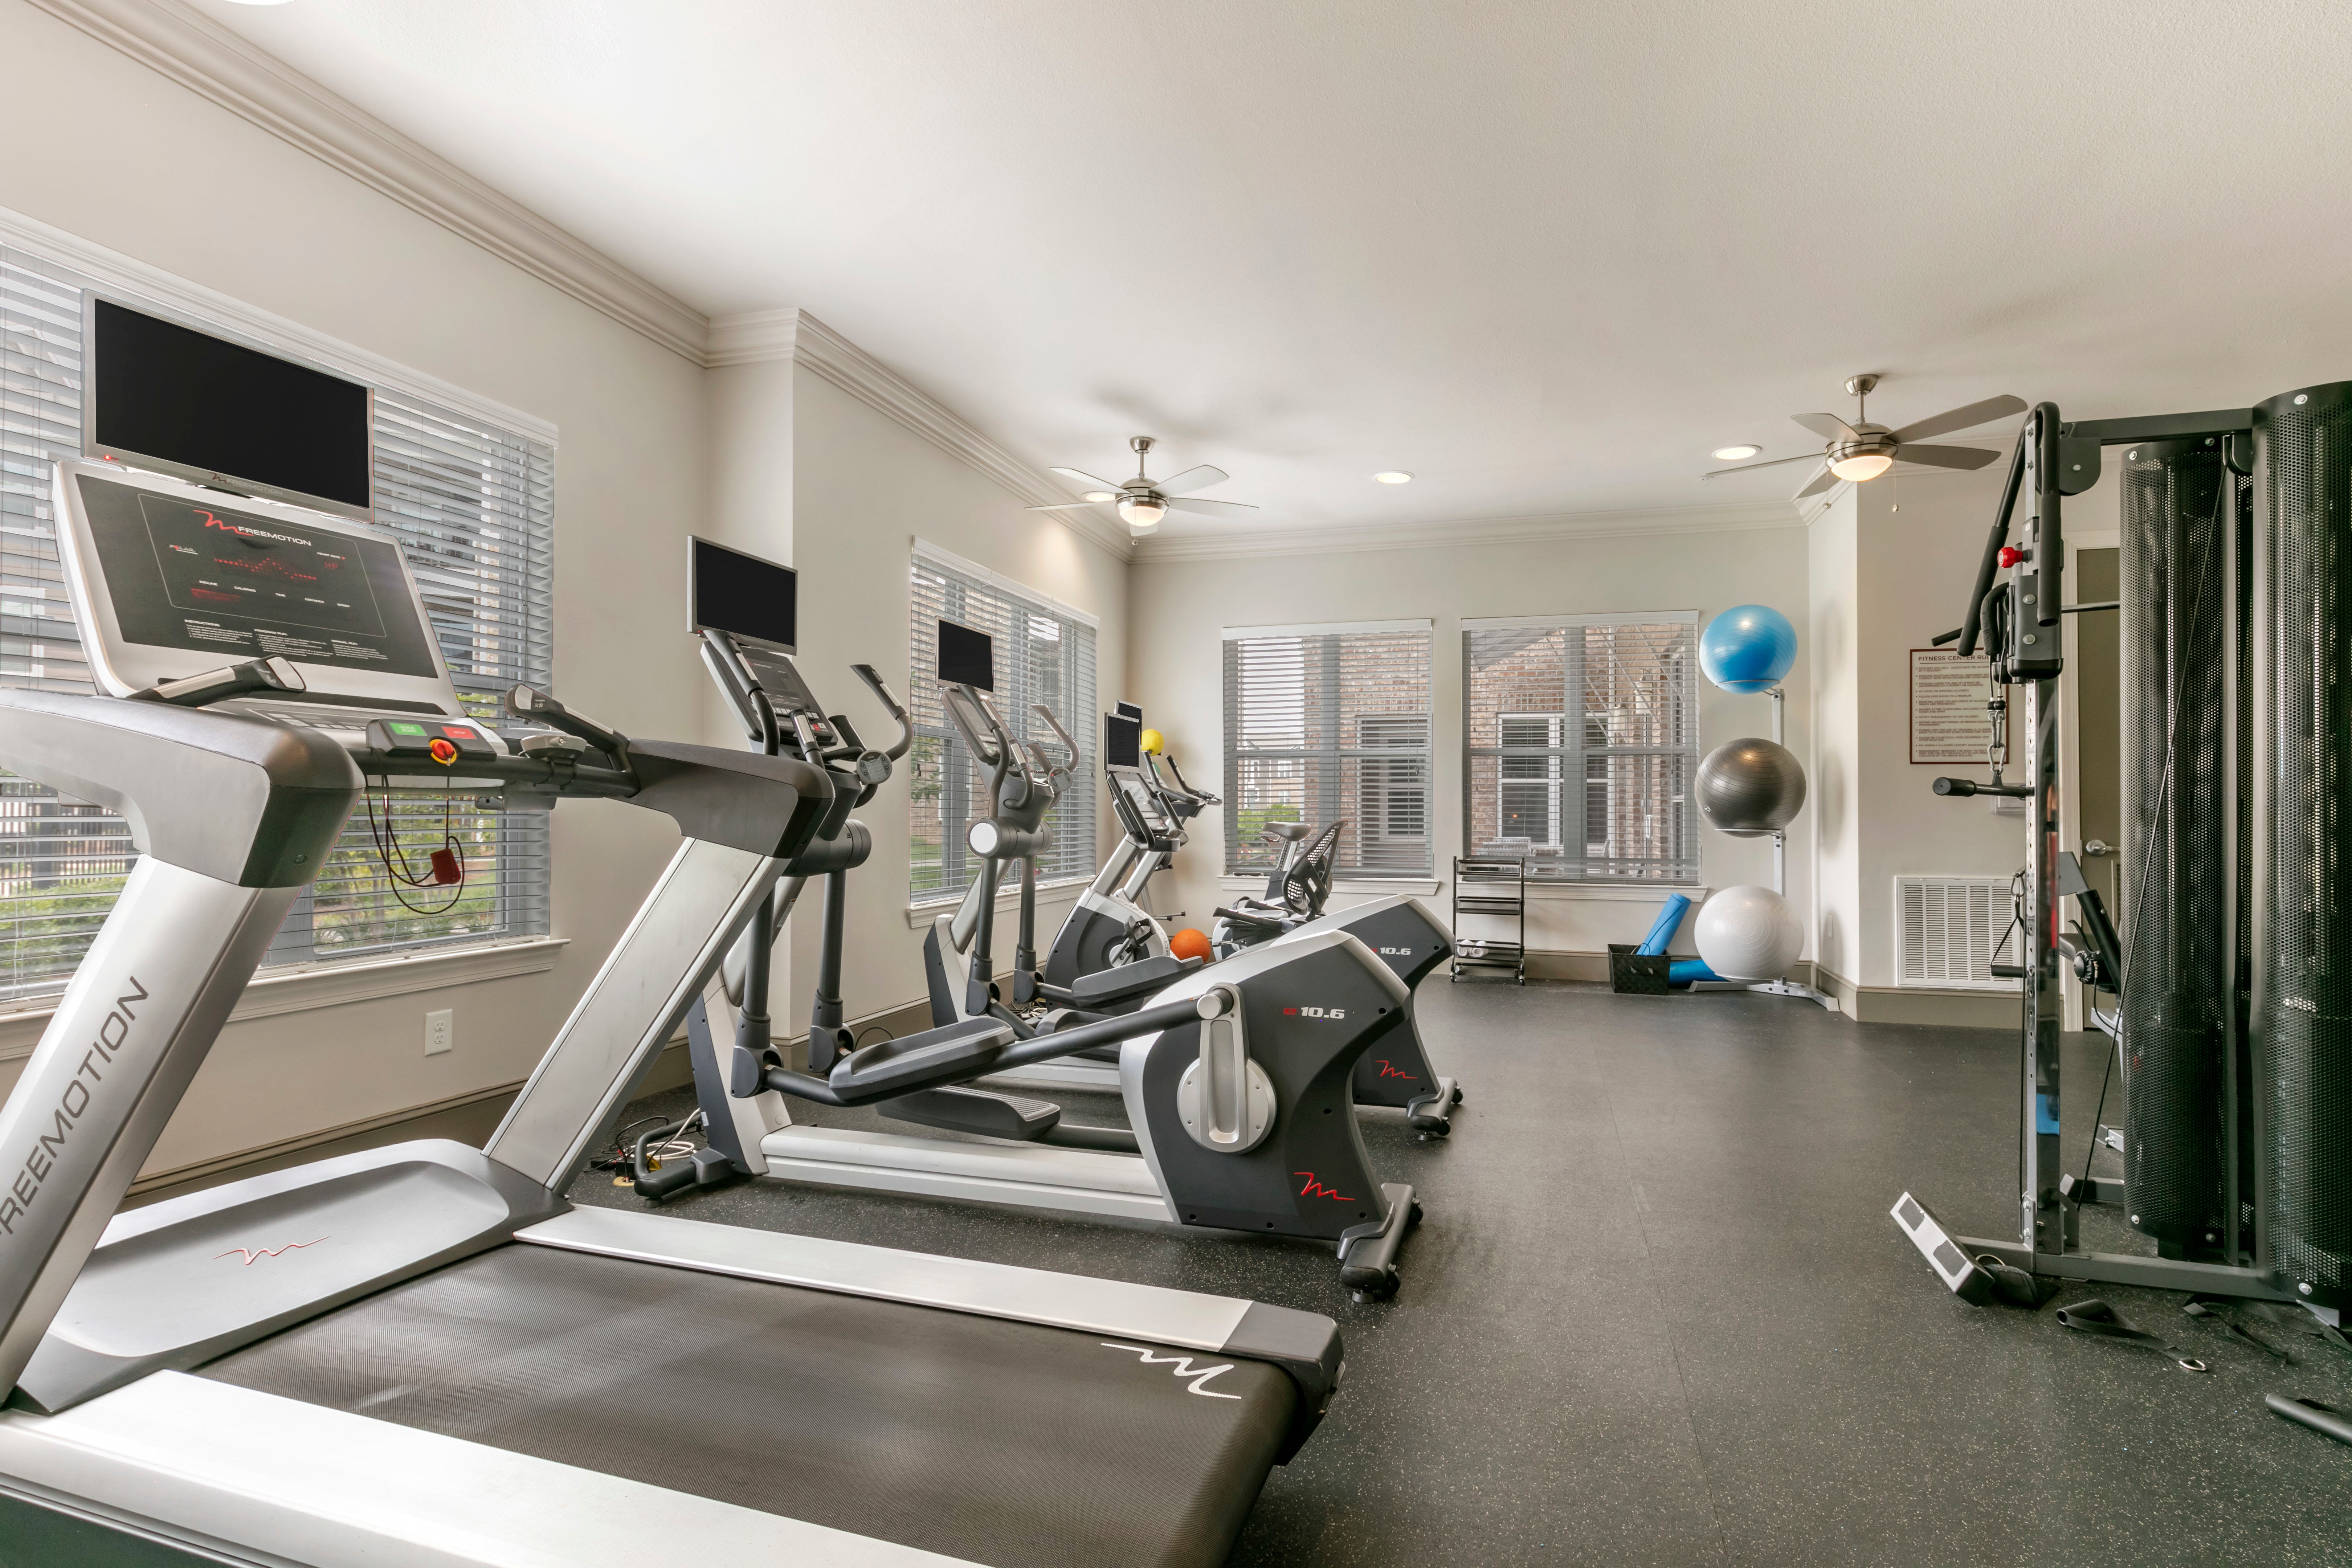 State of the art fitness center at The Village at Apison Pike in Ooltewah, Tennessee